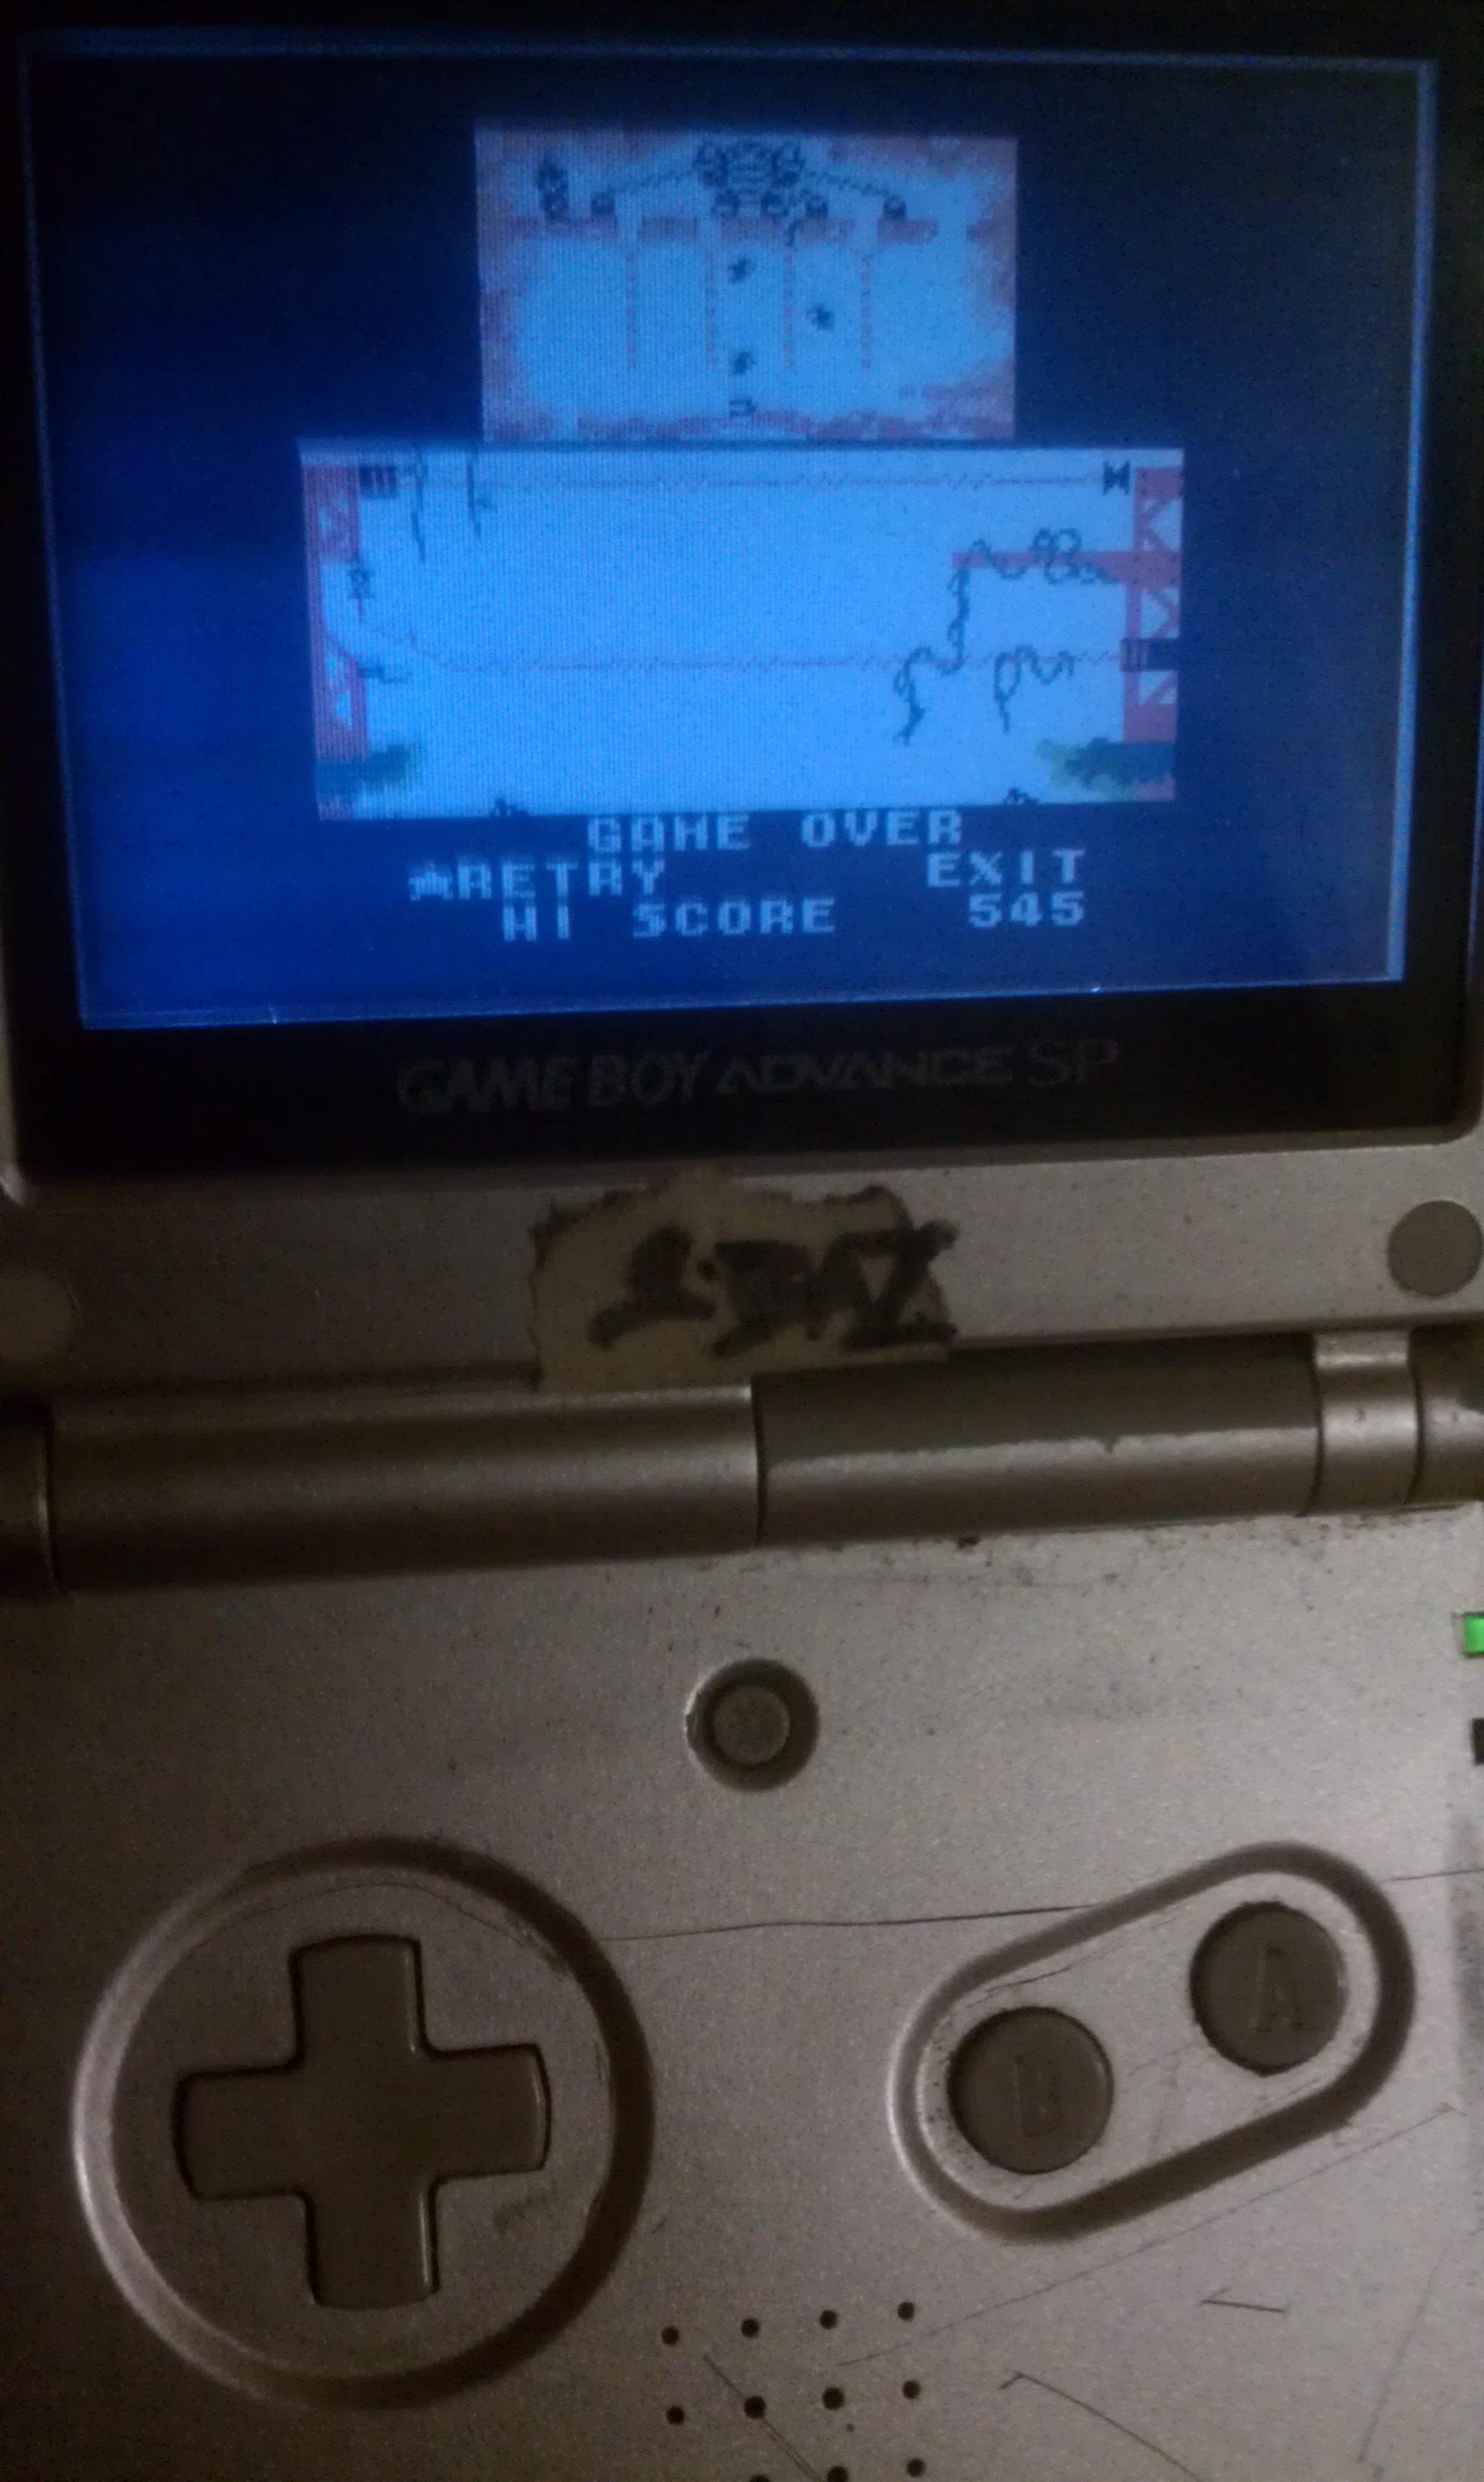 S.BAZ: Game & Watch Gallery 2: Donkey Kong II [Classic: Easy] (Game Boy Color) 545 points on 2018-08-16 13:58:19